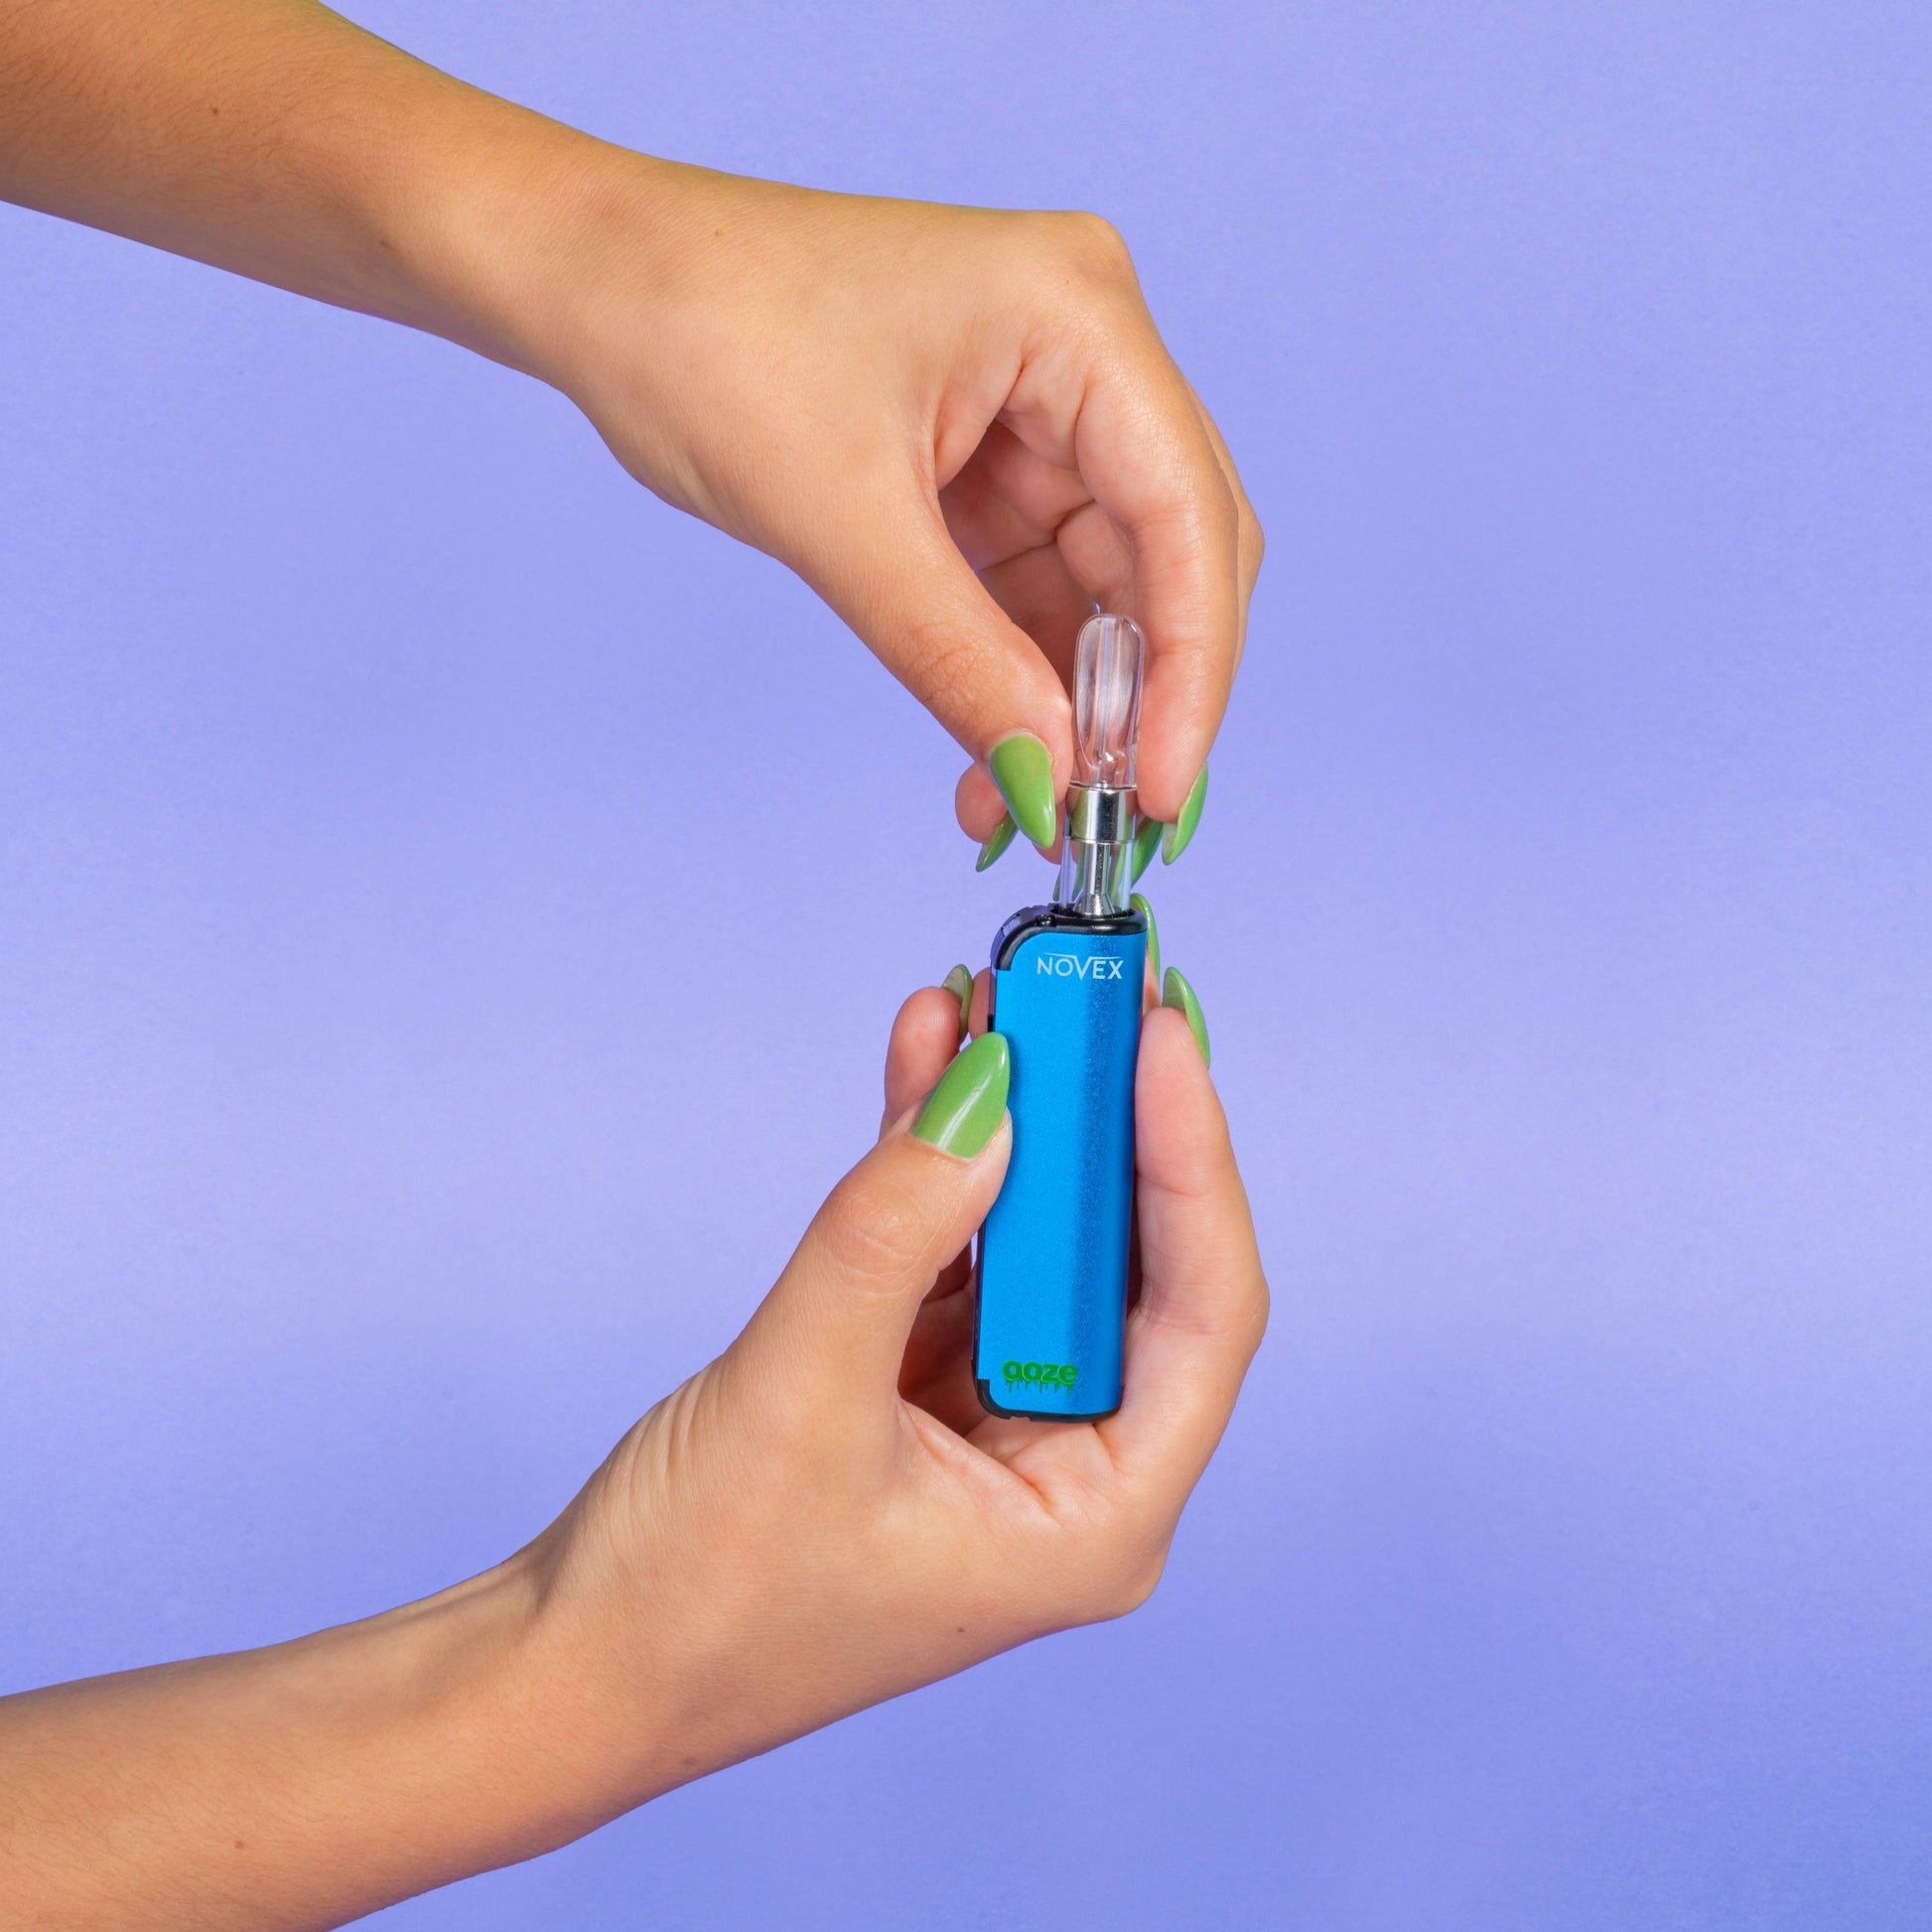 A girl with green nails screws a 510 cartridge into a blue Ooze Novex